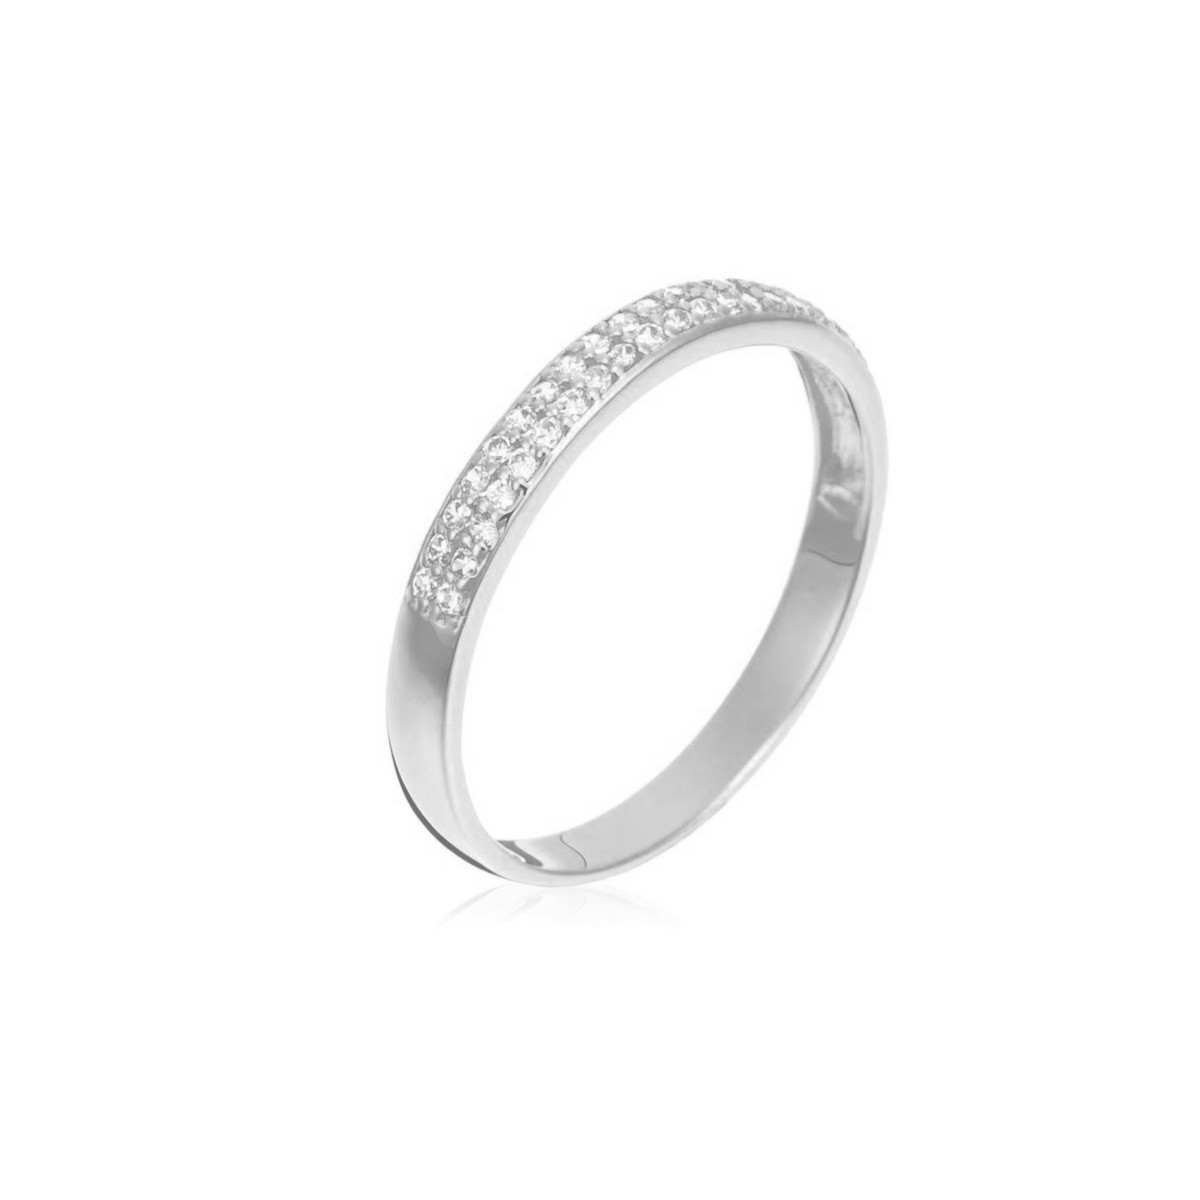 Bague Alliance "Justesse Blanche" Or blanc